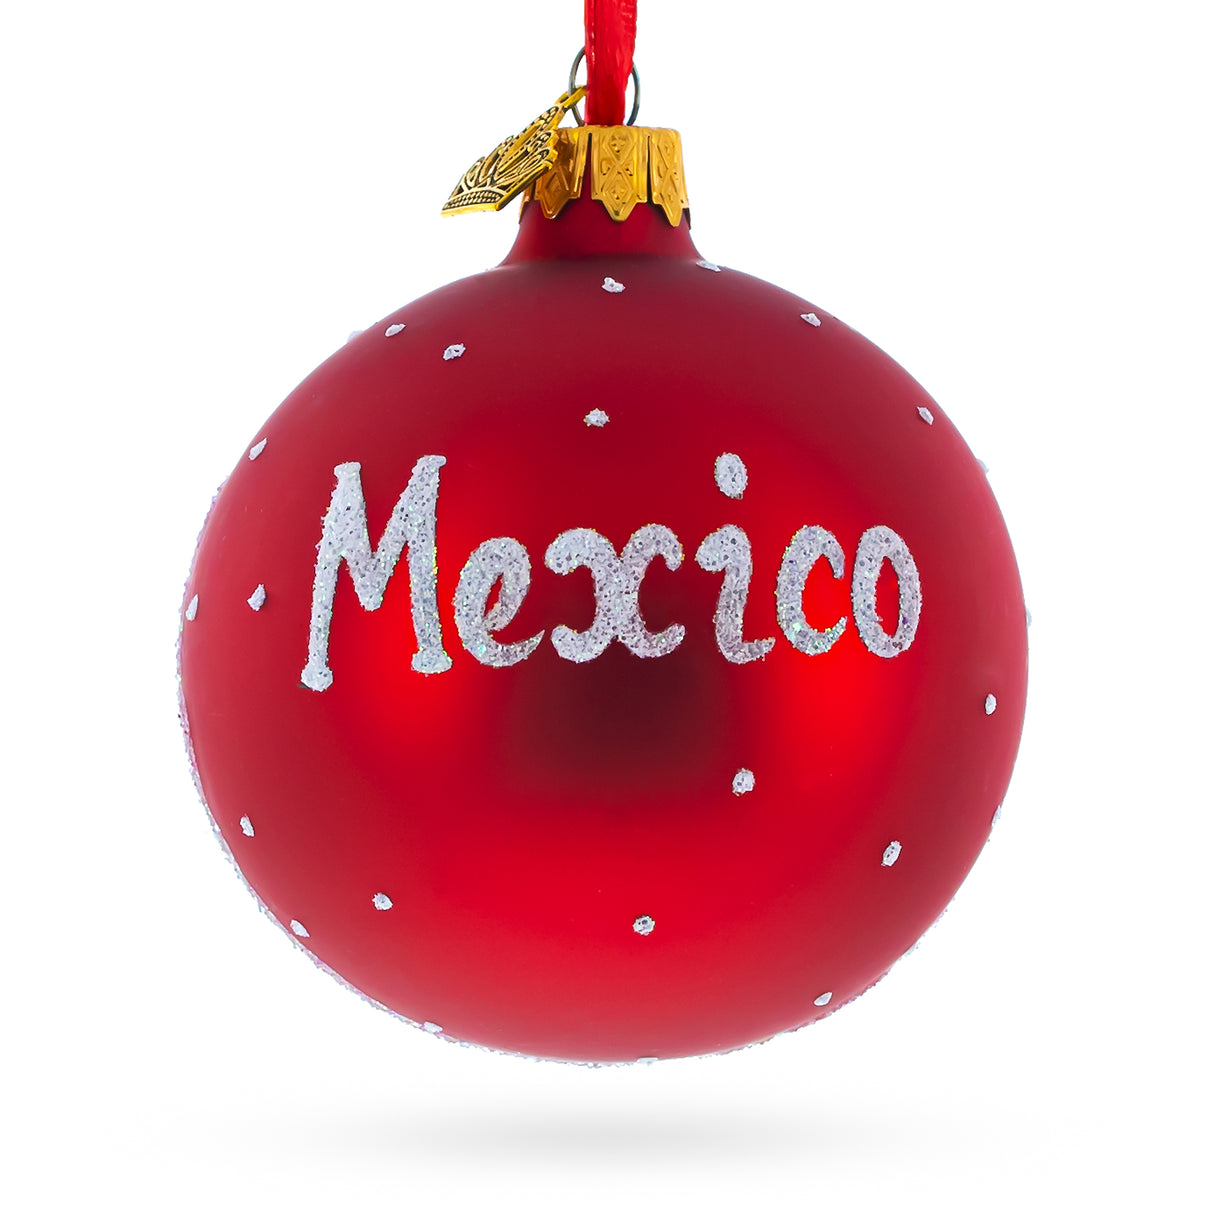 Buy Christmas Ornaments > Travel > North America > Mexico > Wonders of the World by BestPysanky Online Gift Ship